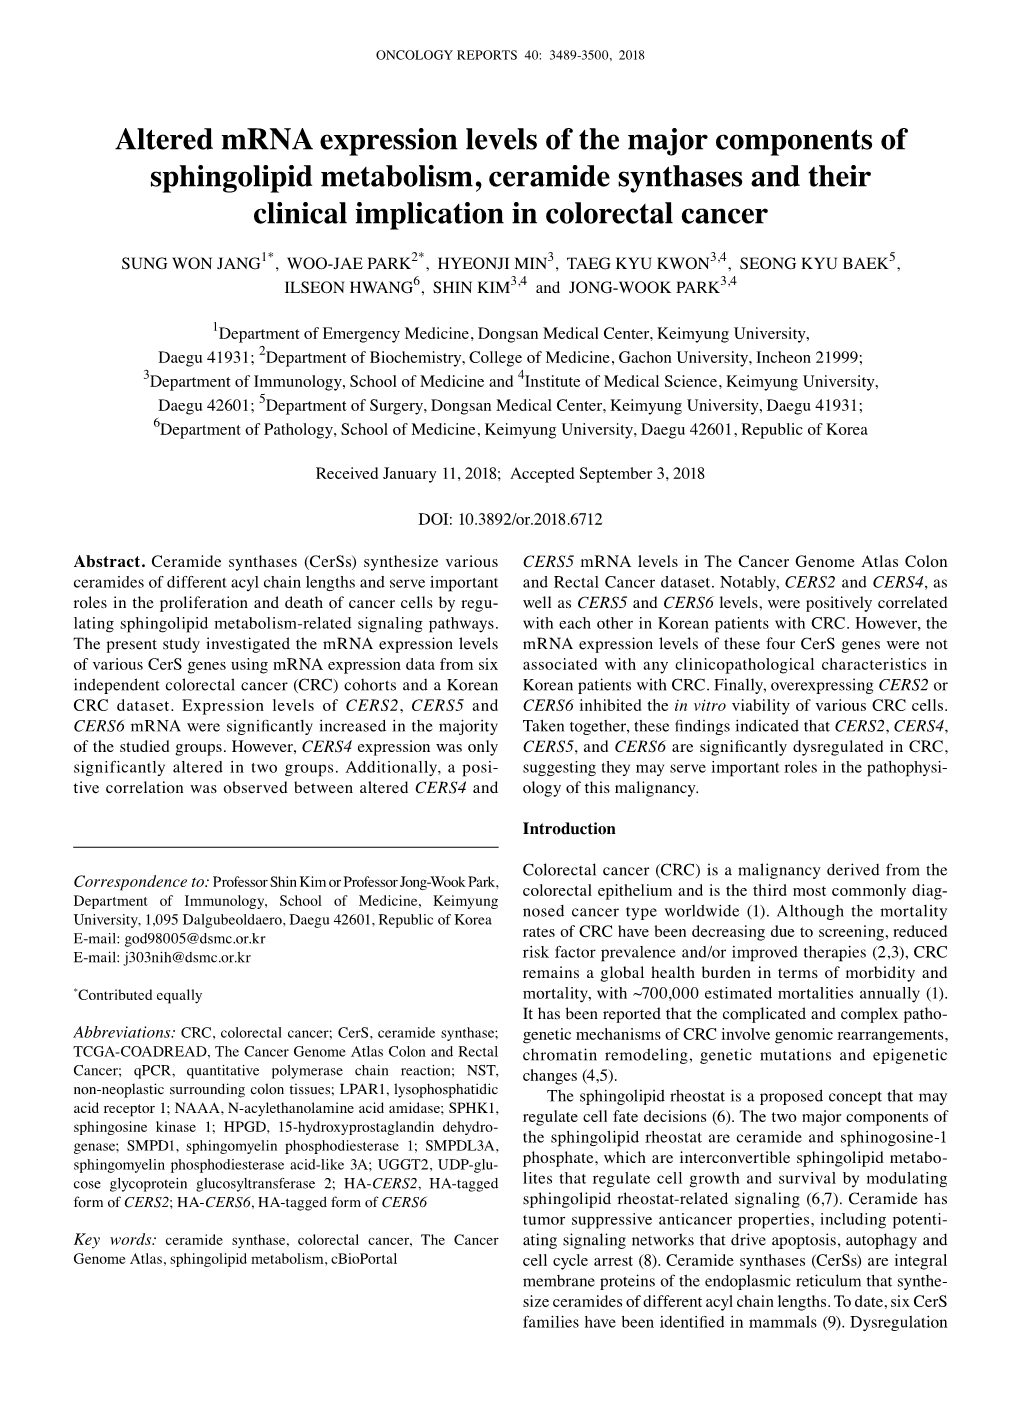 Altered Mrna Expression Levels of the Major Components of Sphingolipid Metabolism, Ceramide Synthases and Their Clinical Implication in Colorectal Cancer